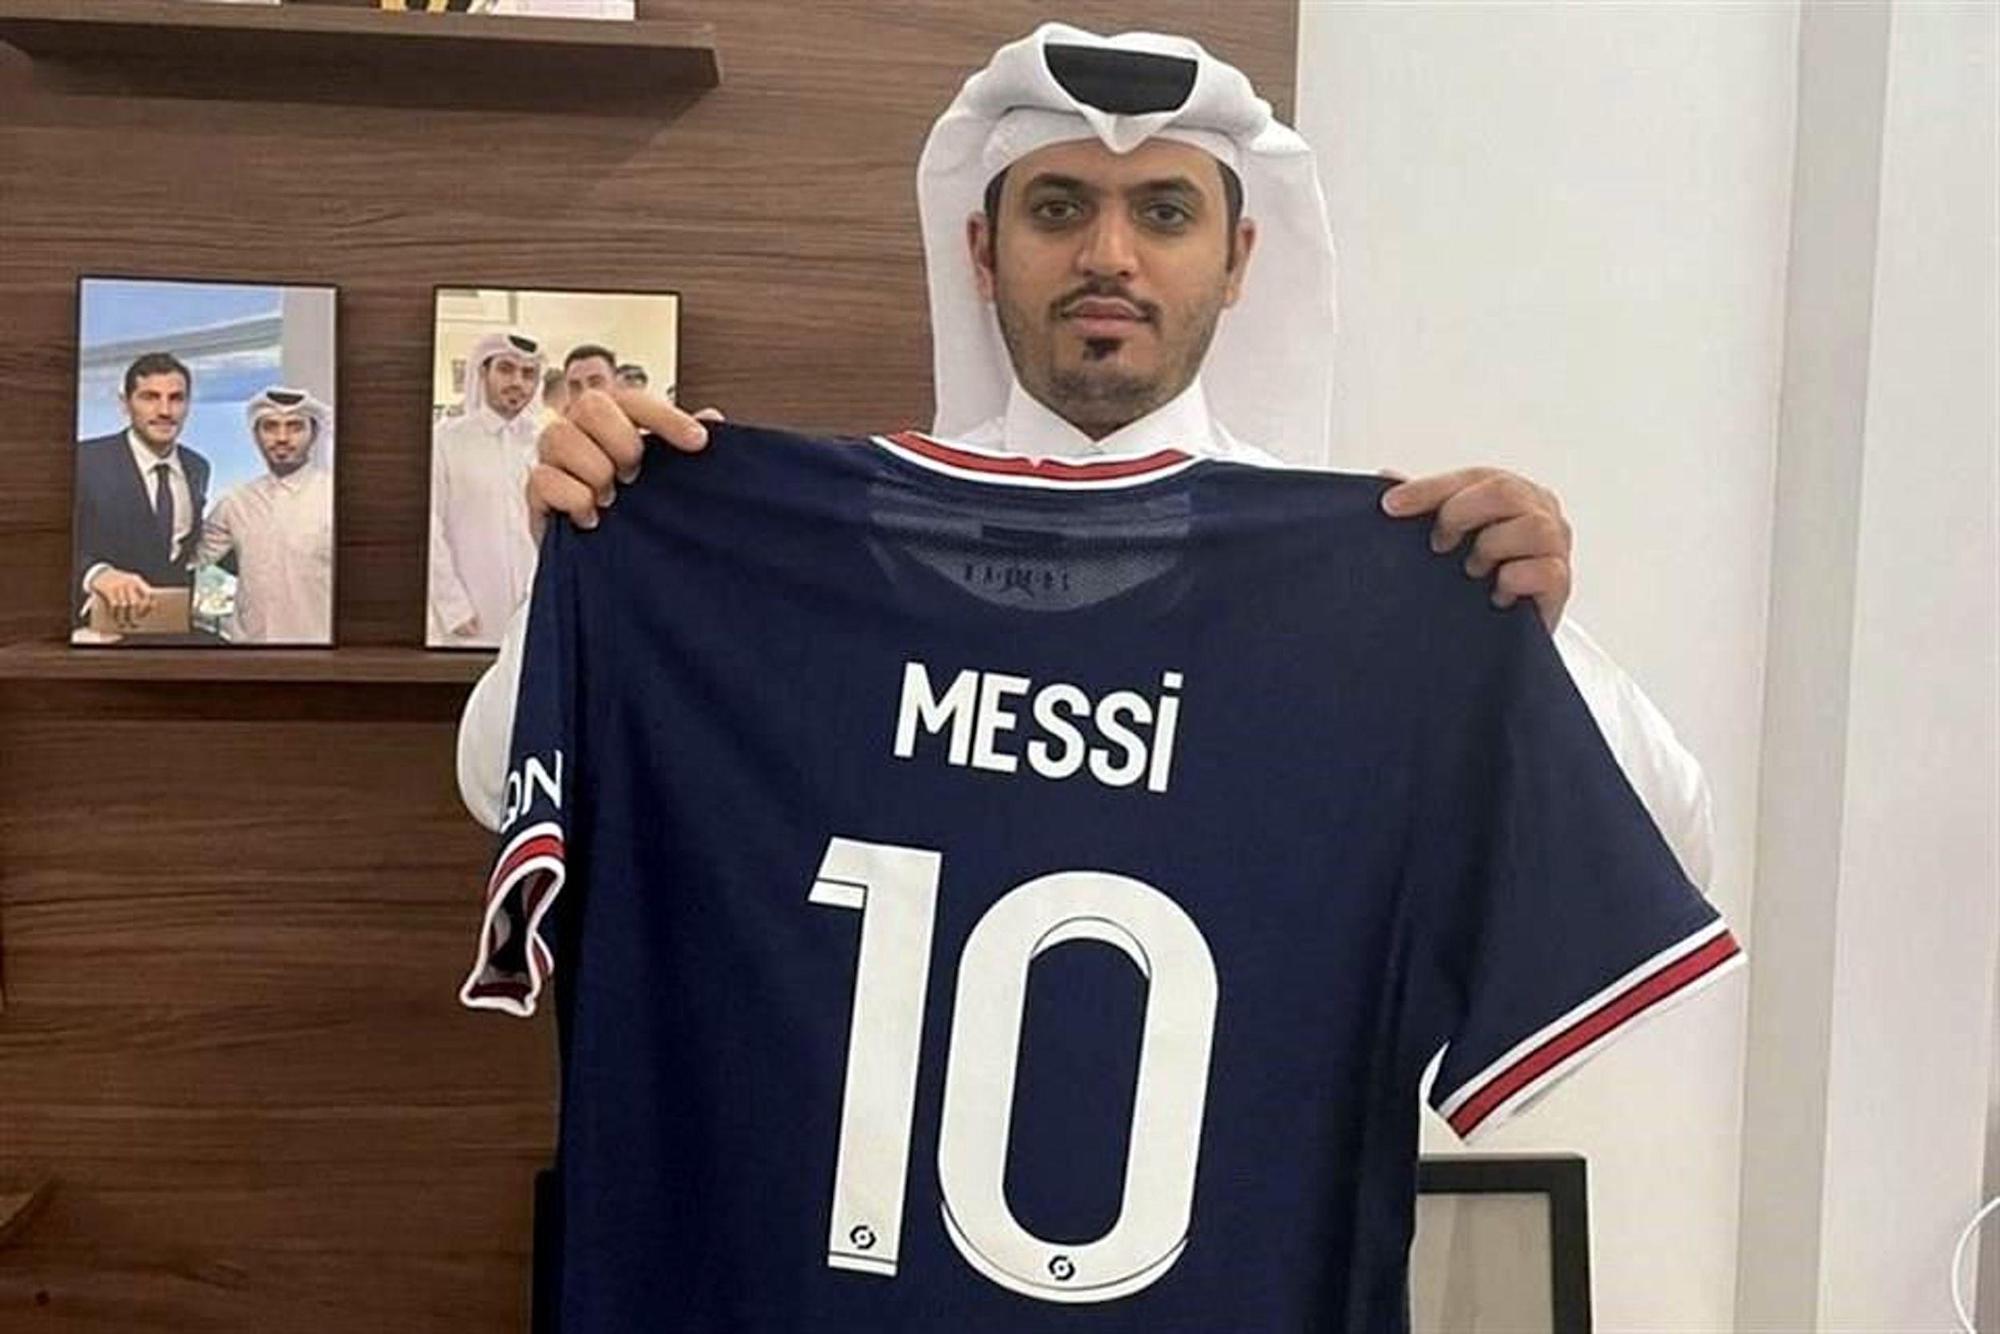 The political background of Messi's signing for PSG